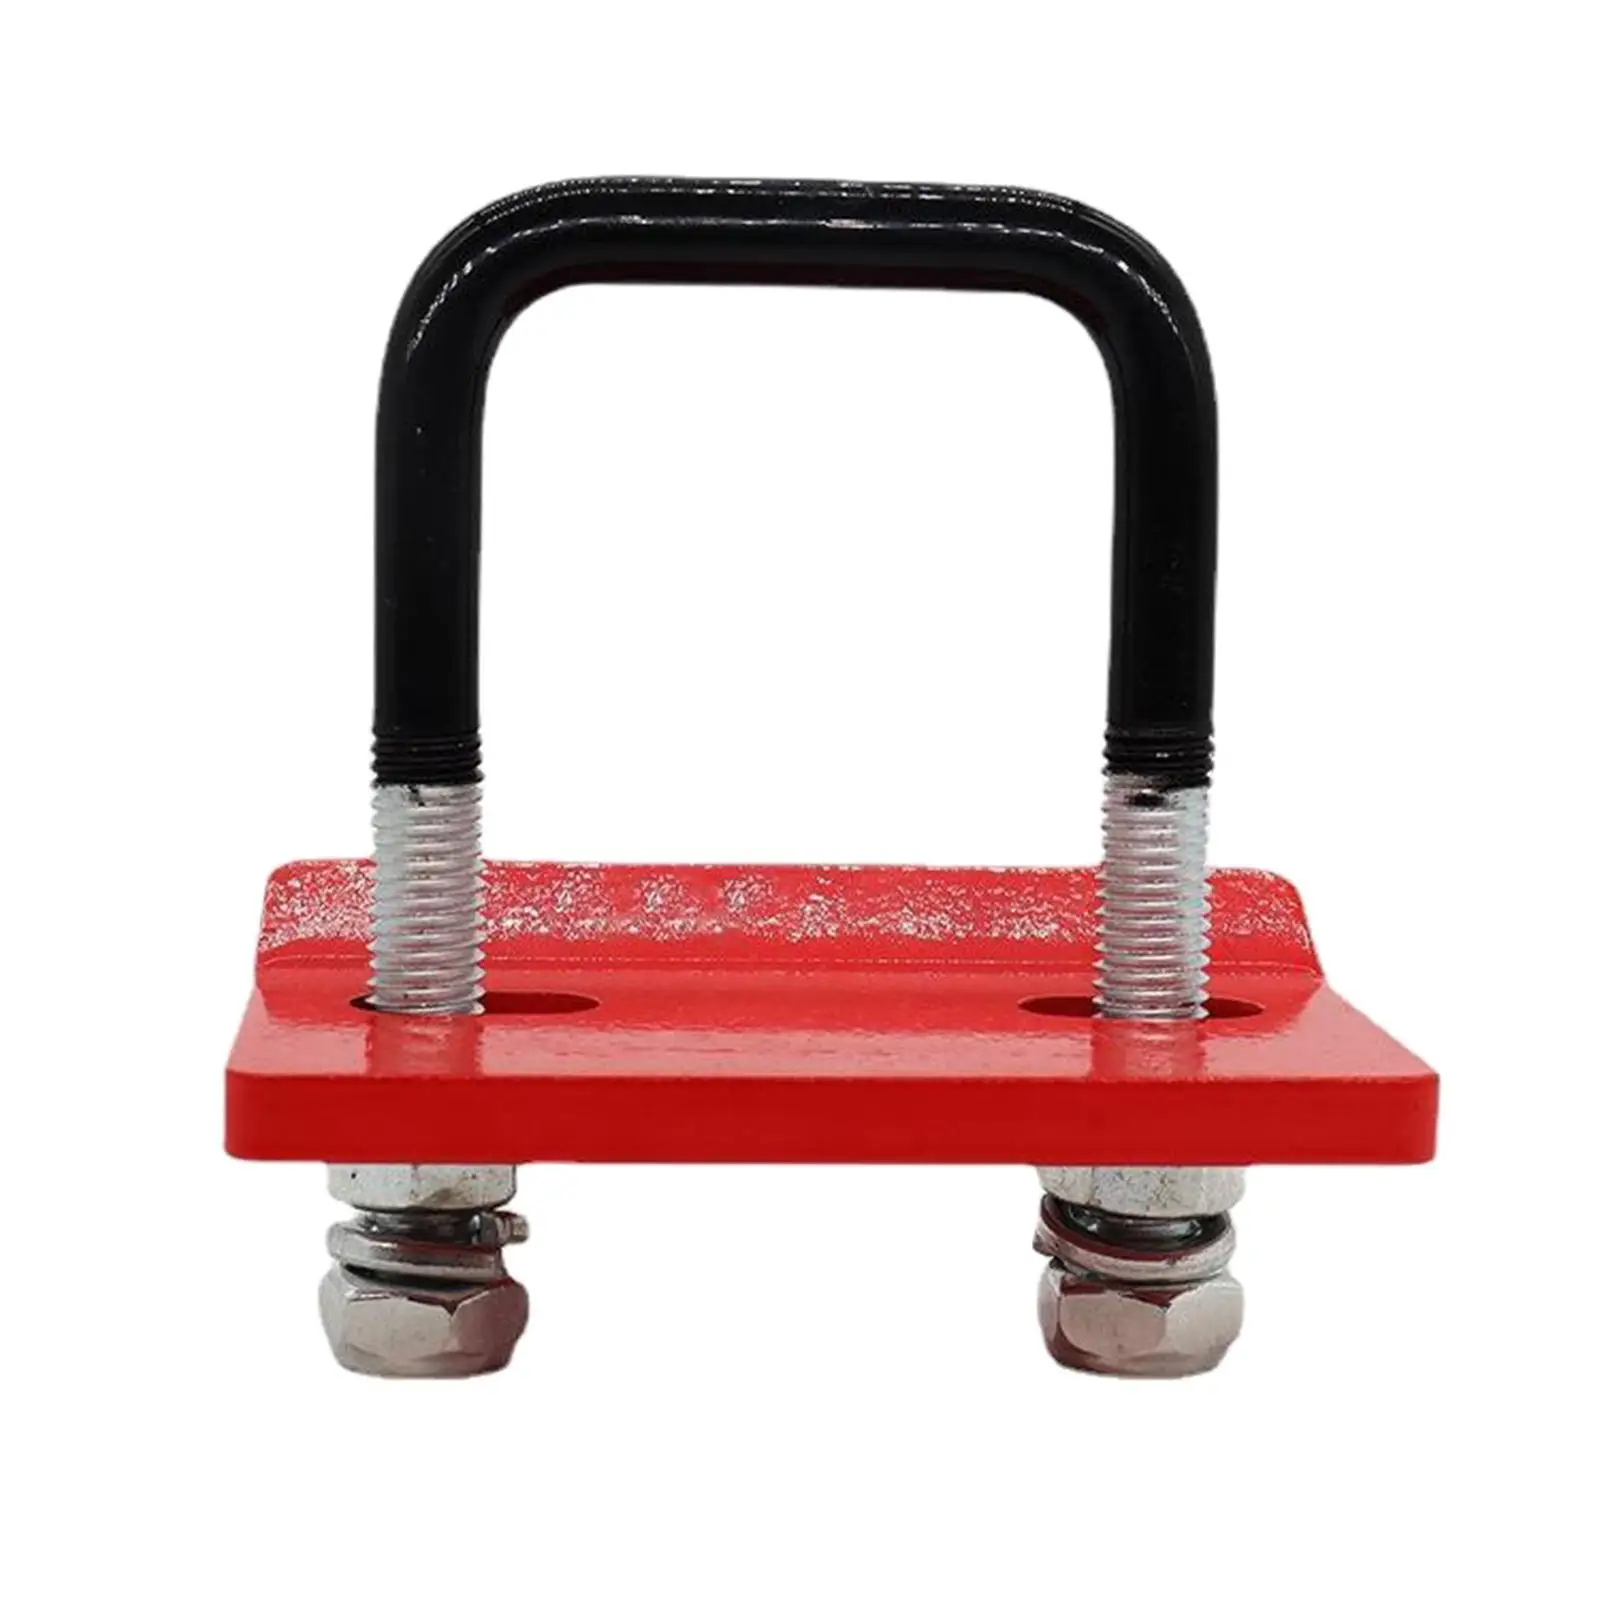 Hitch Tightener Lock Down Tow Clamp for Boat Trailer Ball Mount Hitch Tray